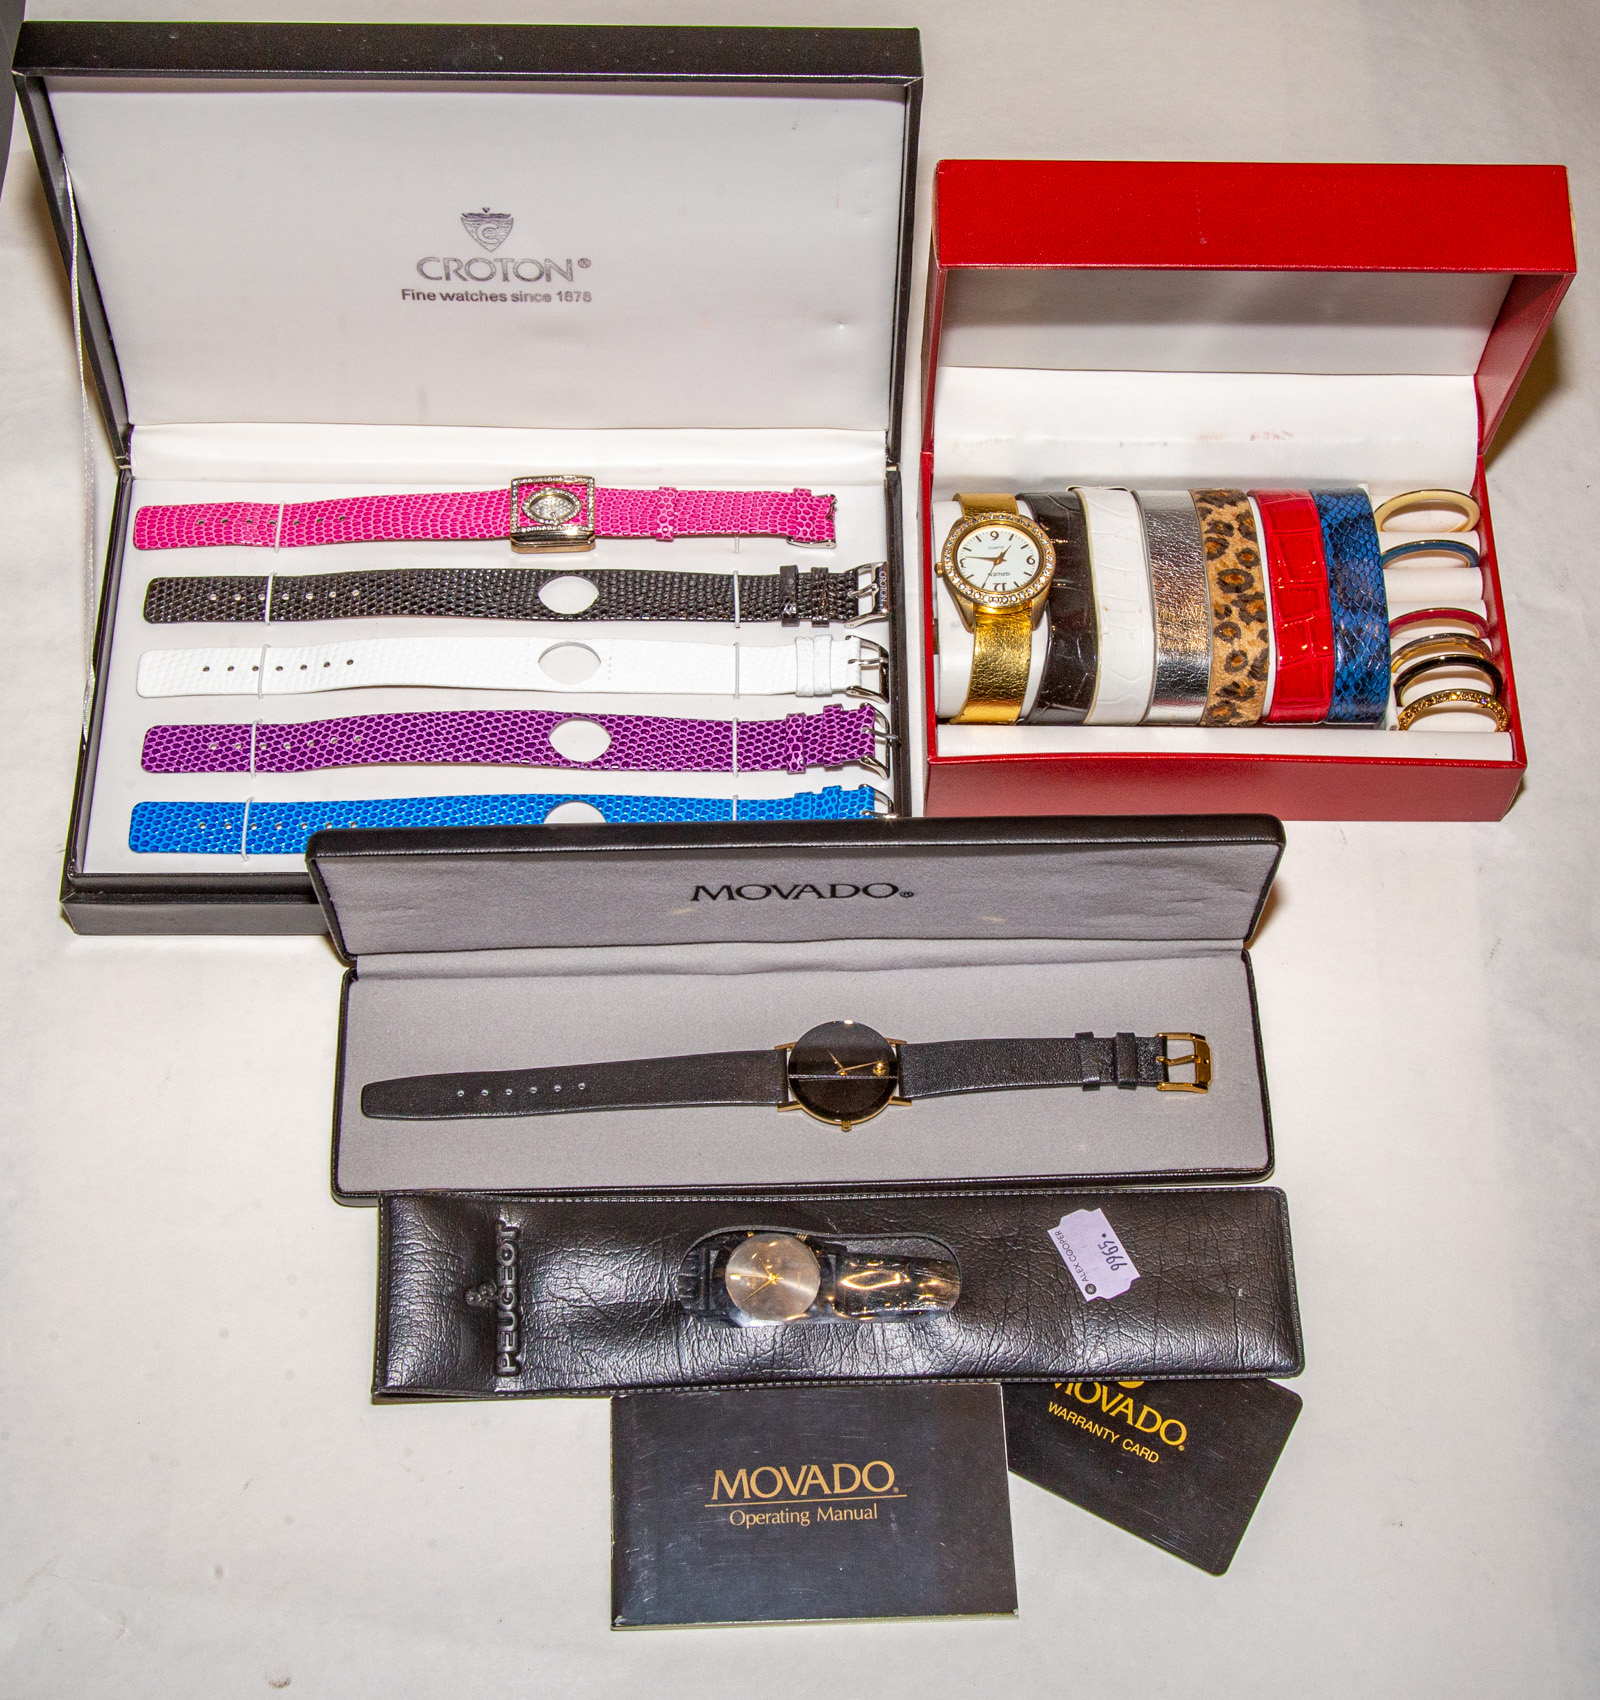 A COLLECTION OF FASHION WATCHES